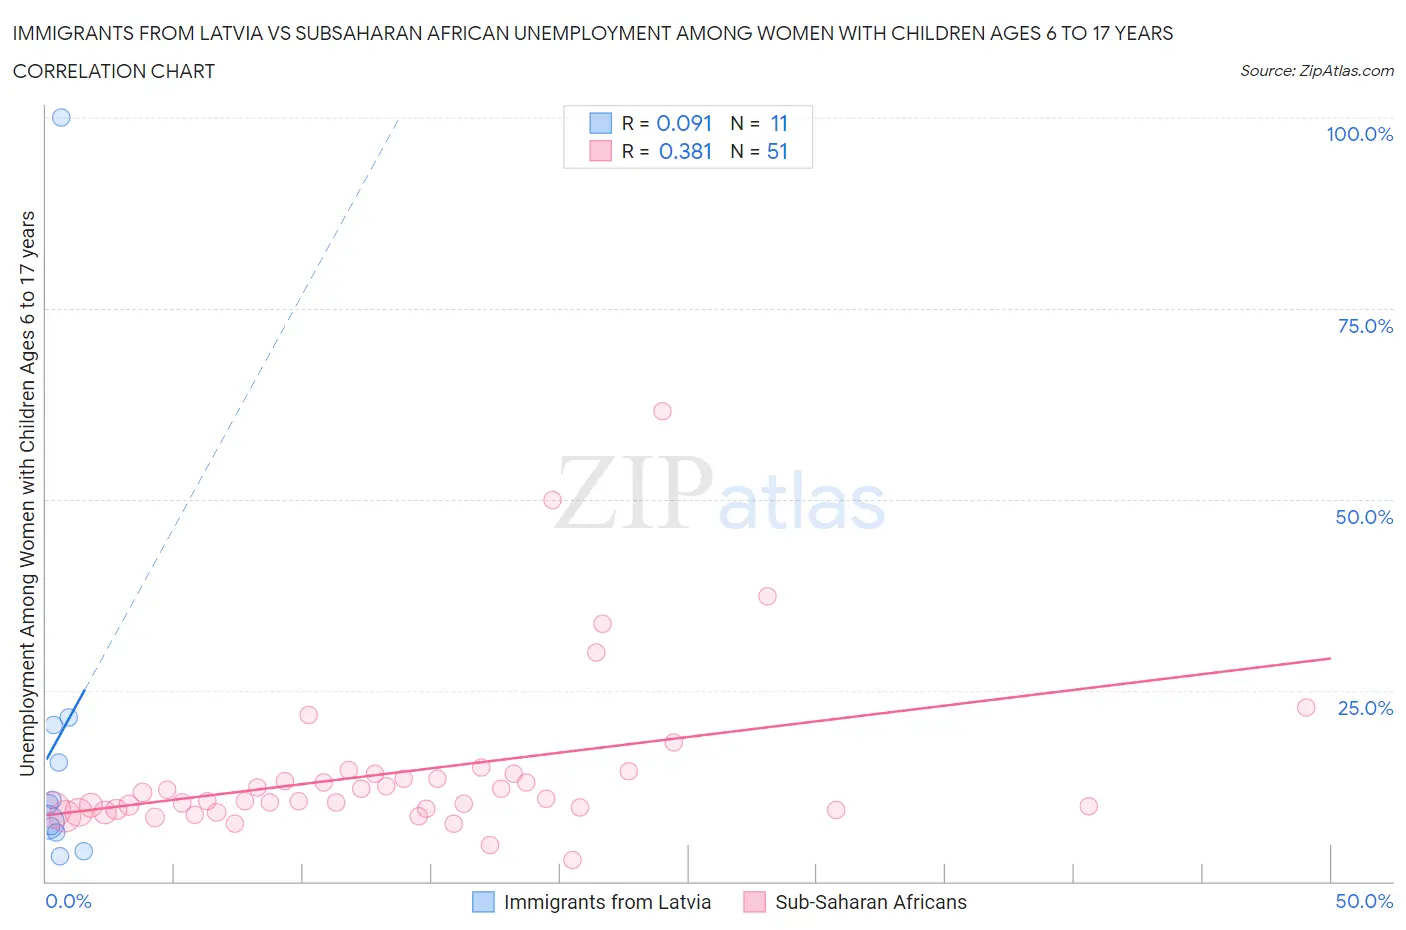 Immigrants from Latvia vs Subsaharan African Unemployment Among Women with Children Ages 6 to 17 years